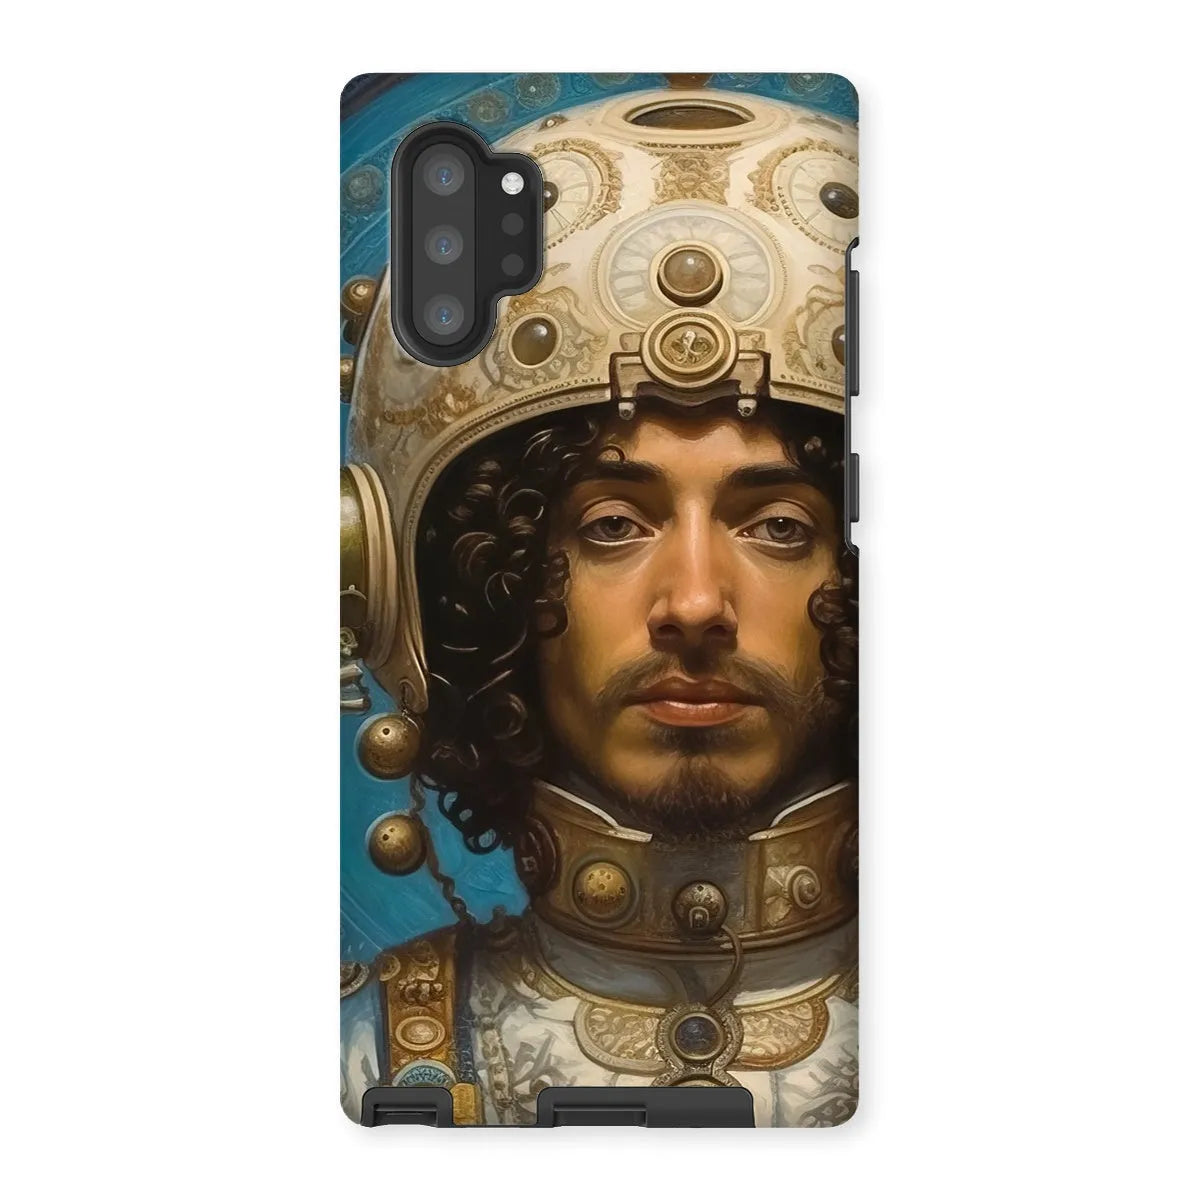 Mehdi The Gay Astronaut - Lgbtq Art Phone Case - Samsung Galaxy Note 10p / Matte - Mobile Phone Cases - Aesthetic Art